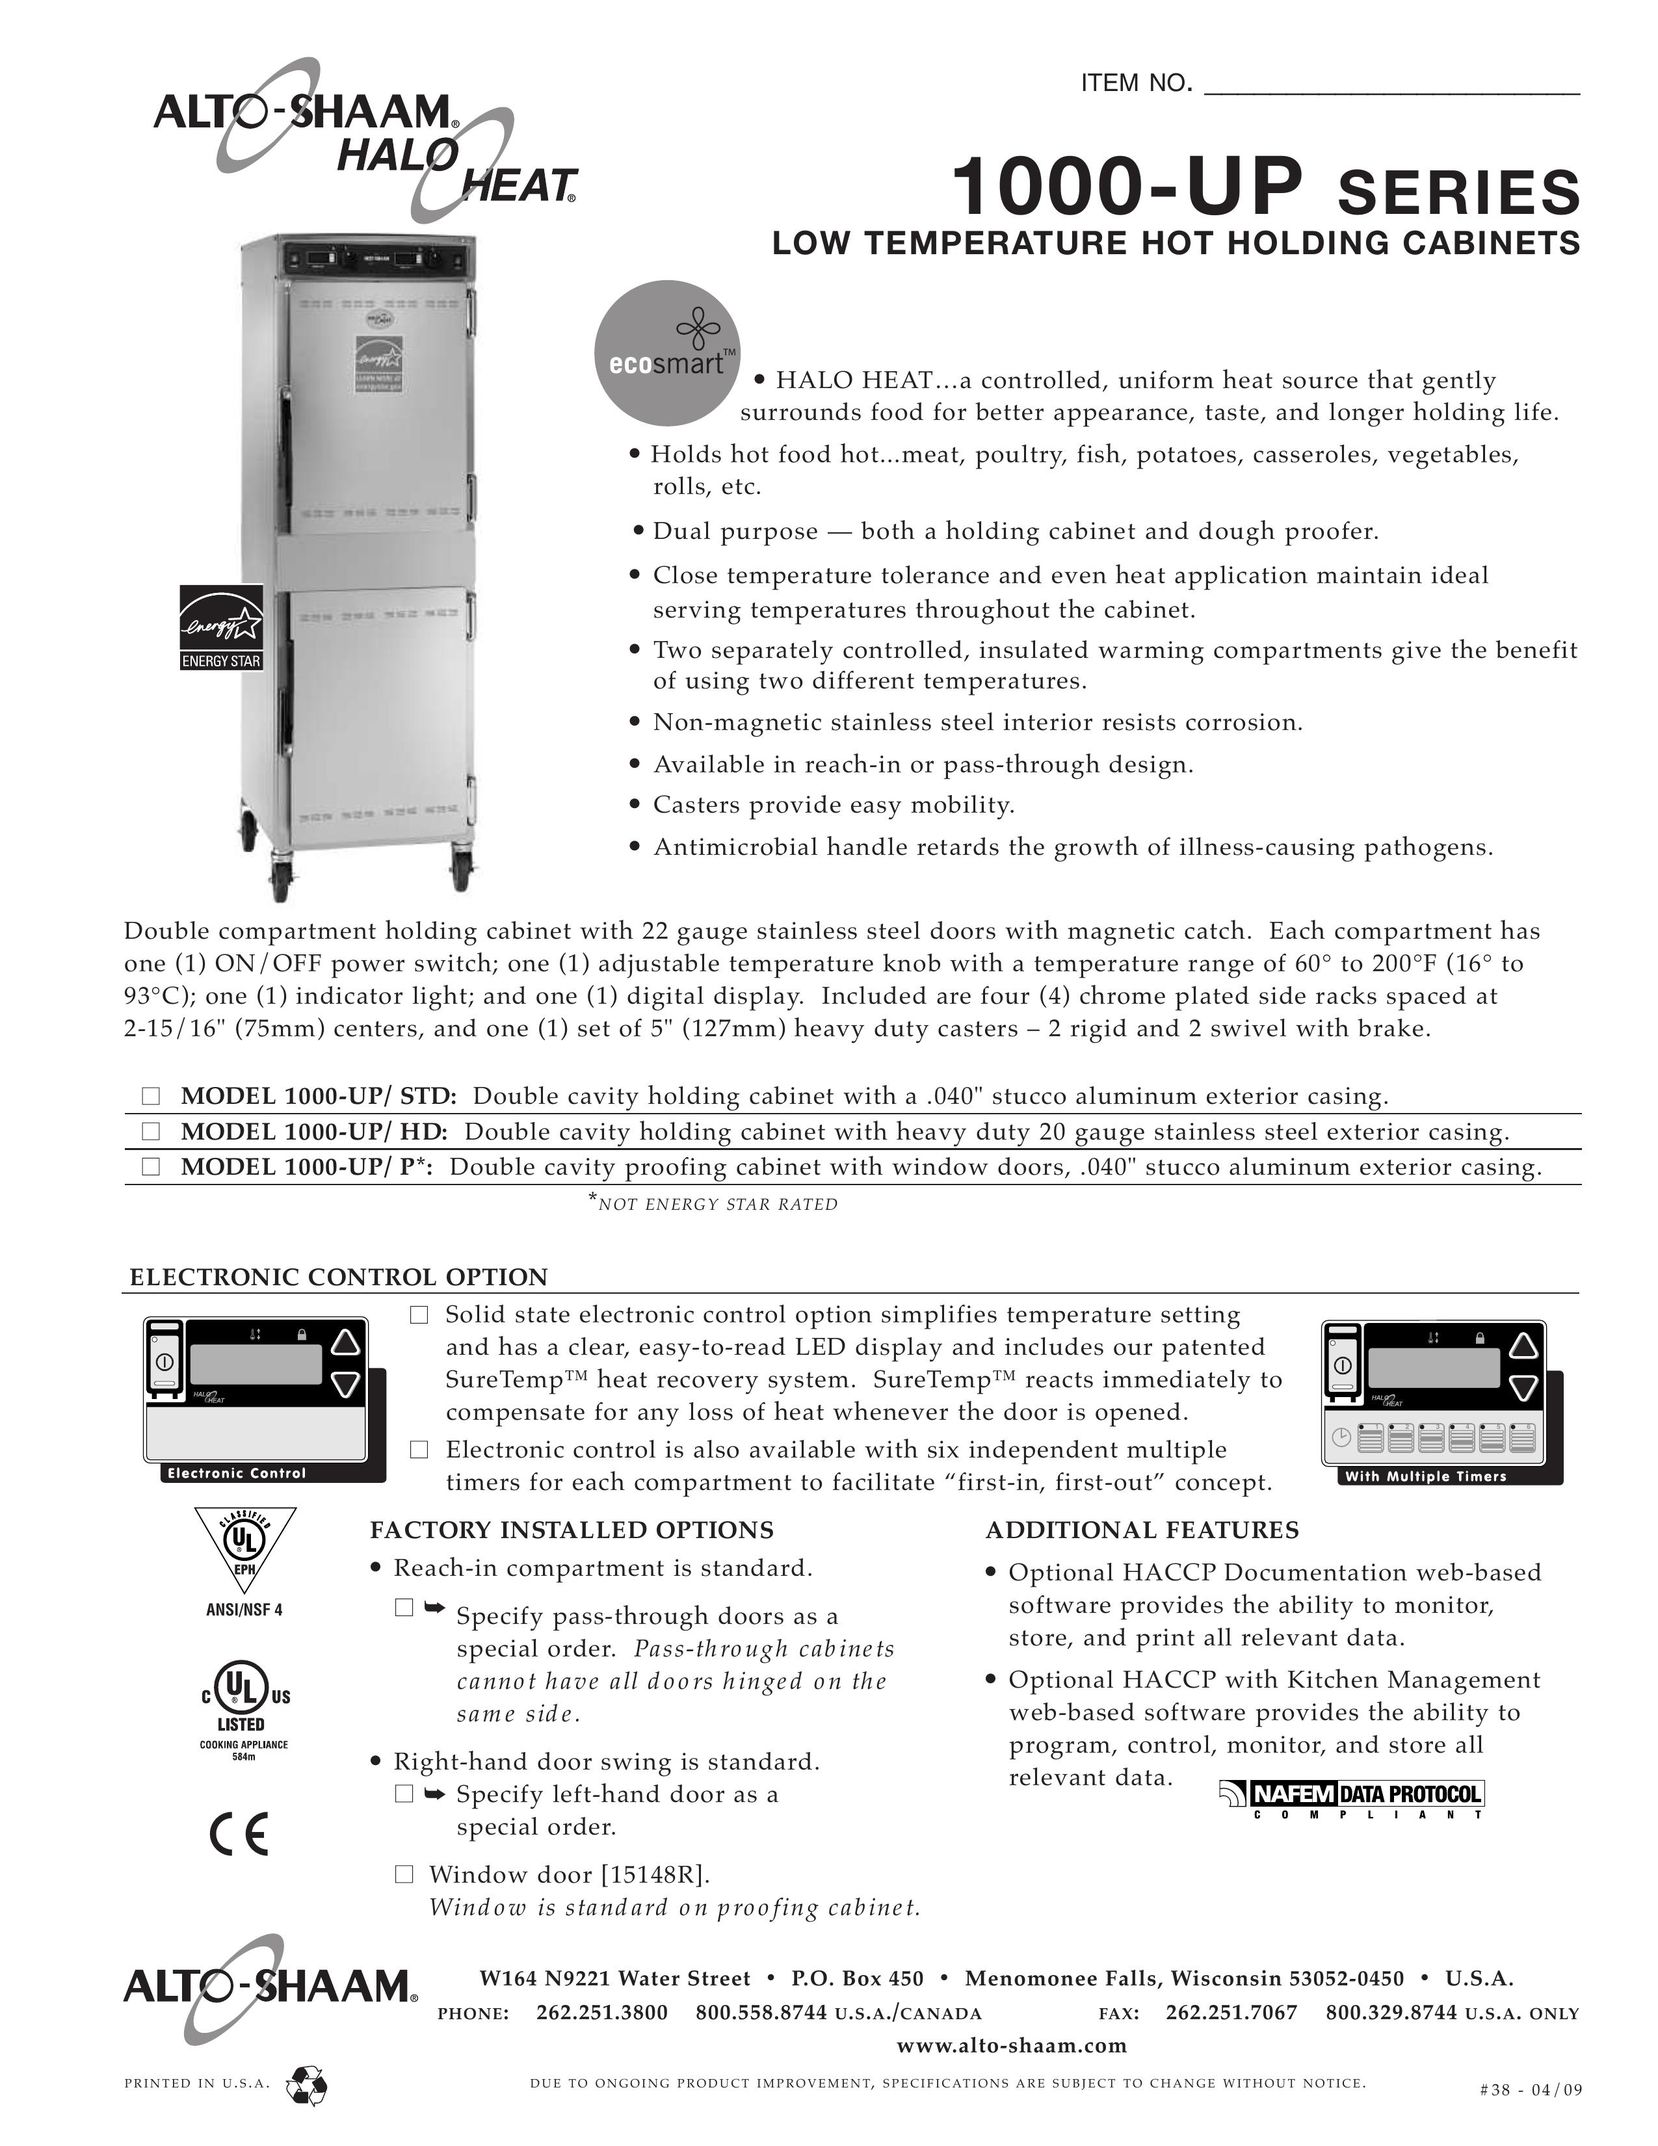 Alto-Shaam 1000-UP/ HD Oven User Manual